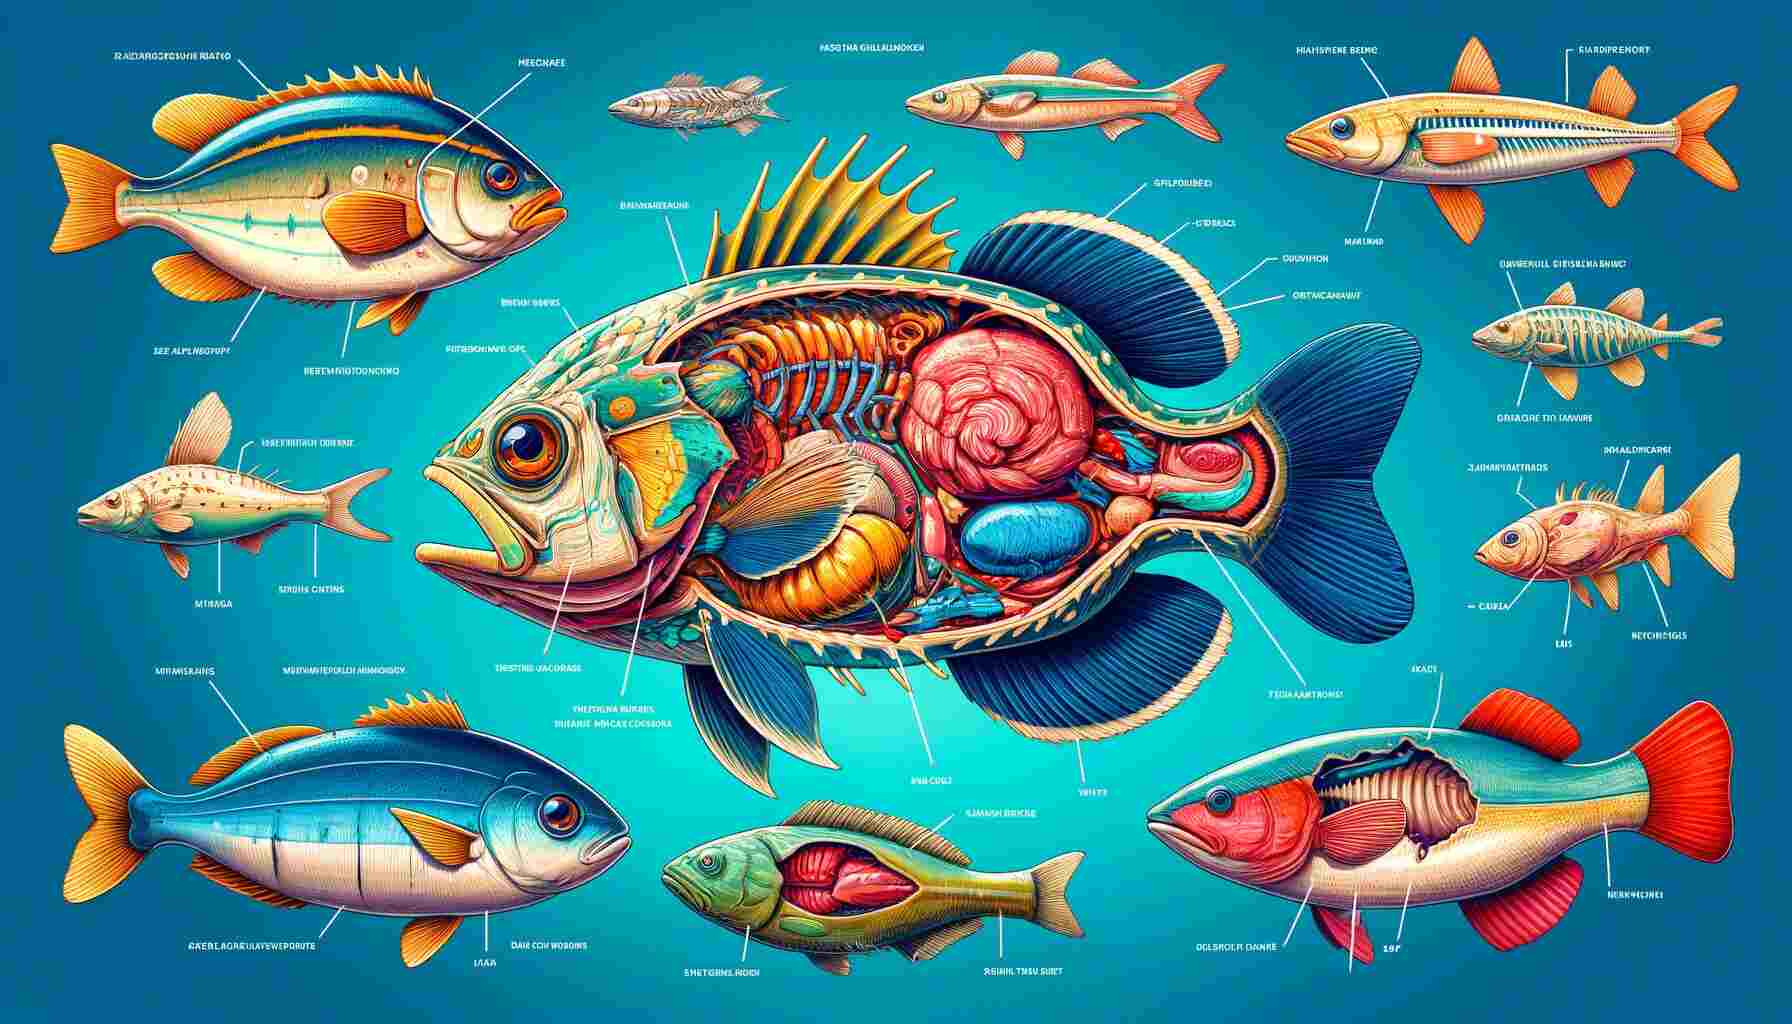 Detailed and vibrant illustration of various fish showcasing their anatomy, with side-by-side comparisons highlighting unique body shapes, fins, scales, gills, and internal organs, set against a gradient blue aquatic background with labels pointing to key anatomical features.